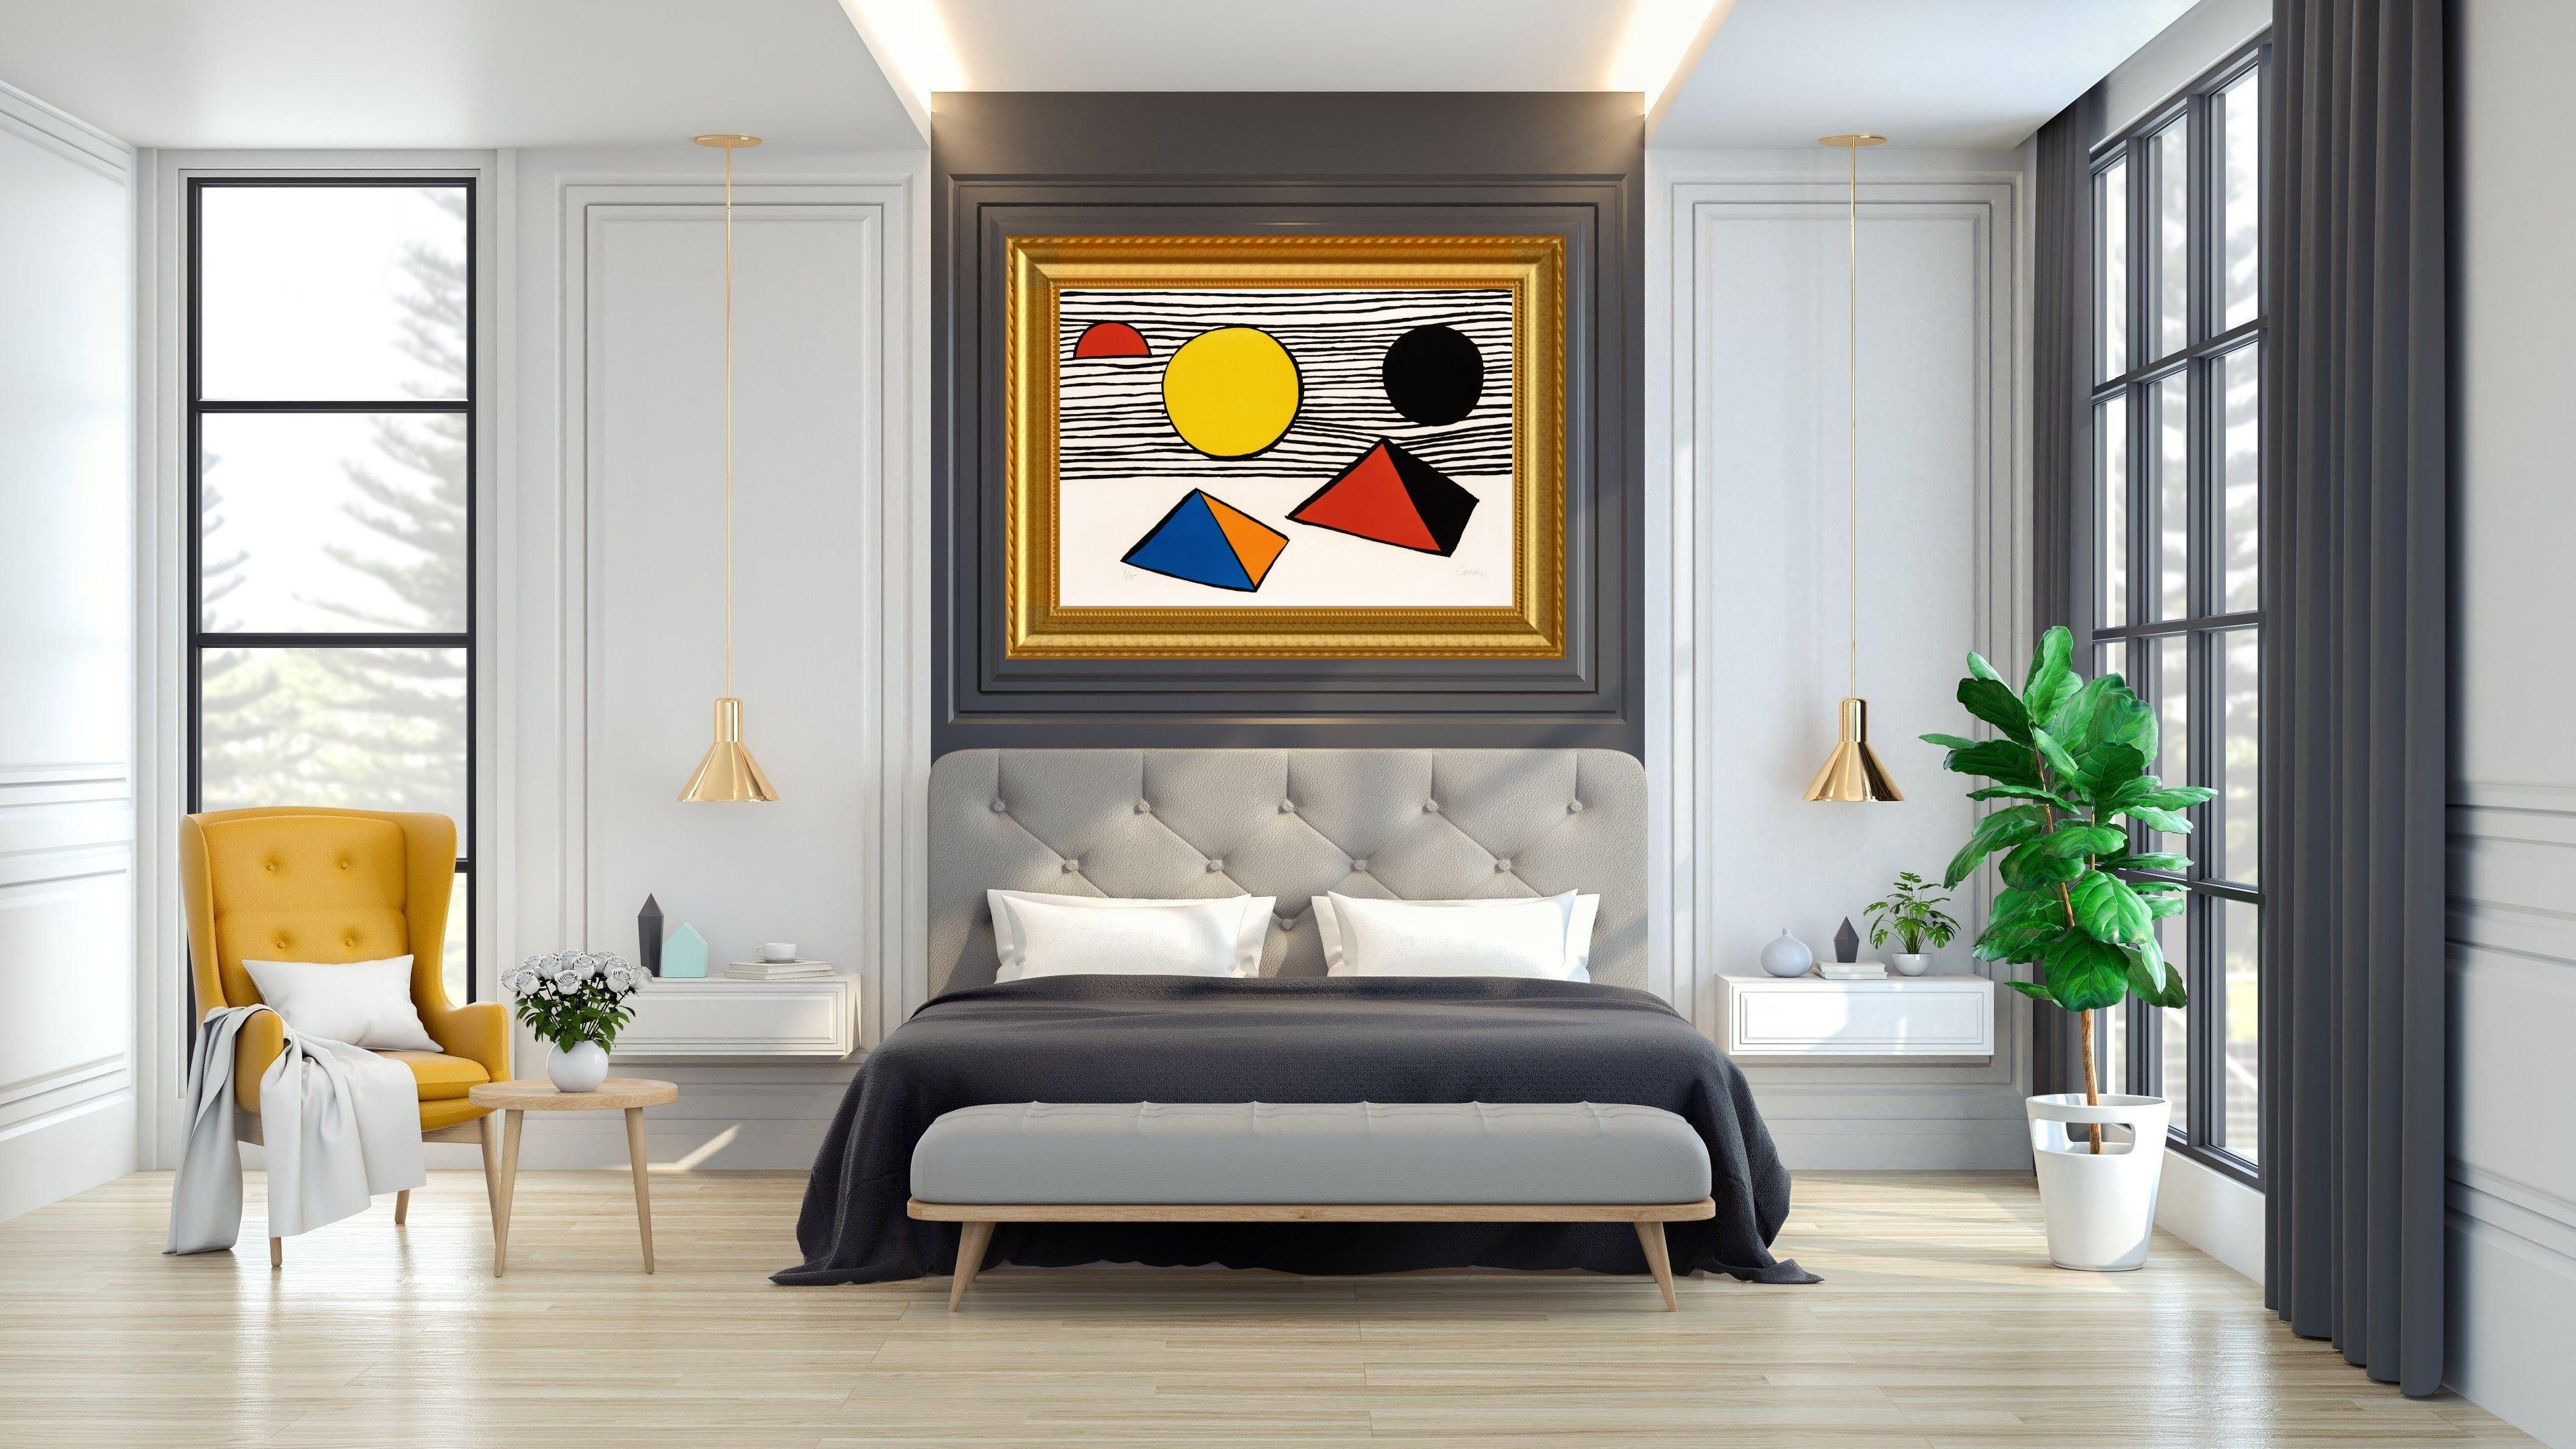 ALEXANDER CALDER  PYRAMIDS AND SUN  SIGNED AND NUMBERED 1